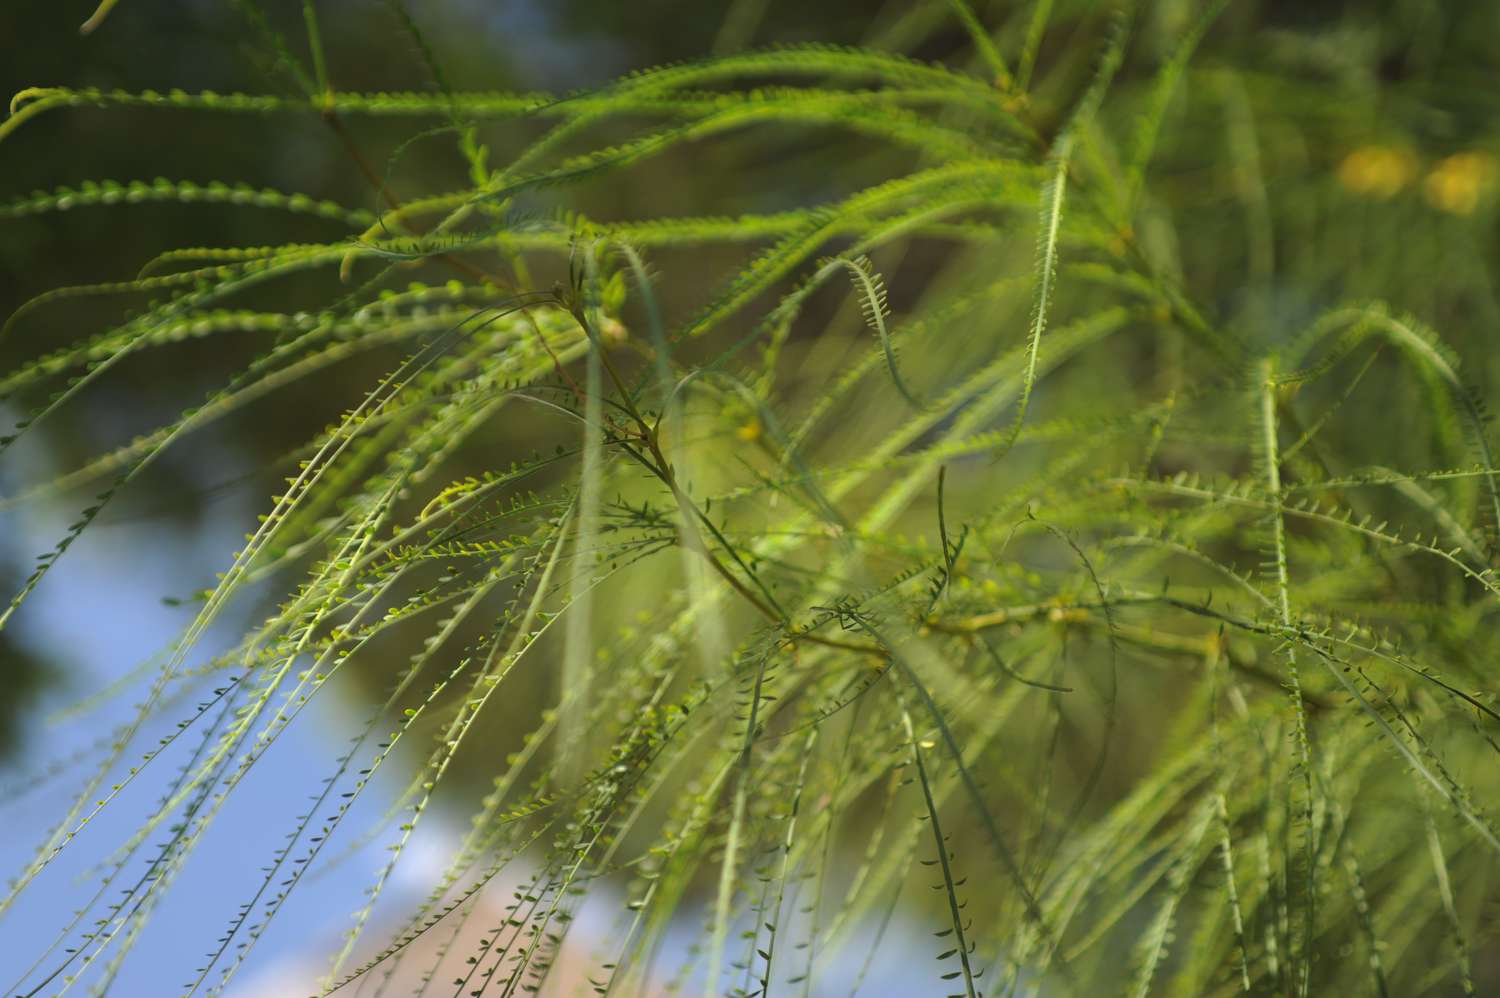 Palo verde thin pinnate stems with long feathery green leaves closeup